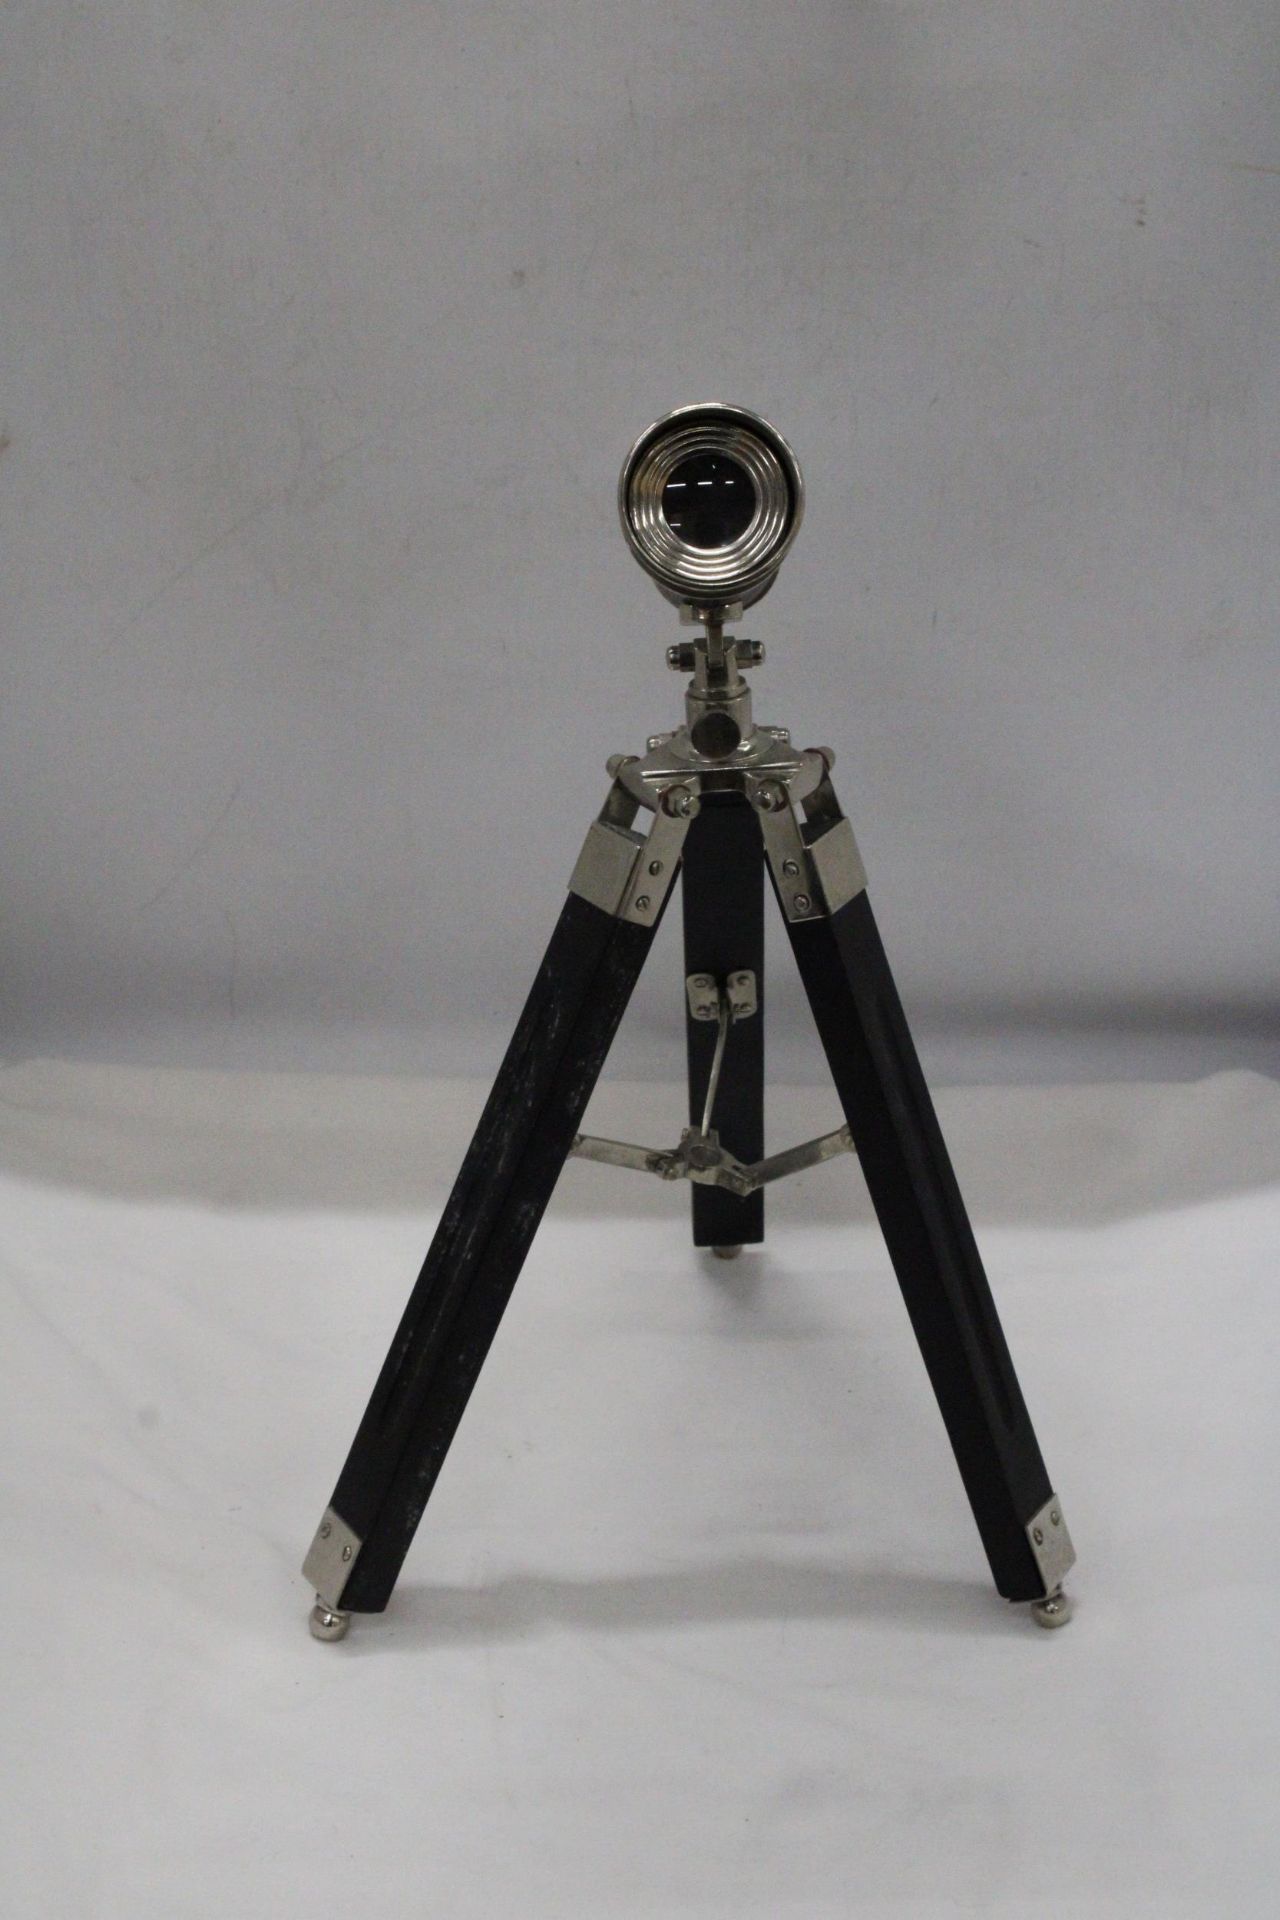 A CHROME TELESCOPE WITH TRIPOD STAND - Image 2 of 4